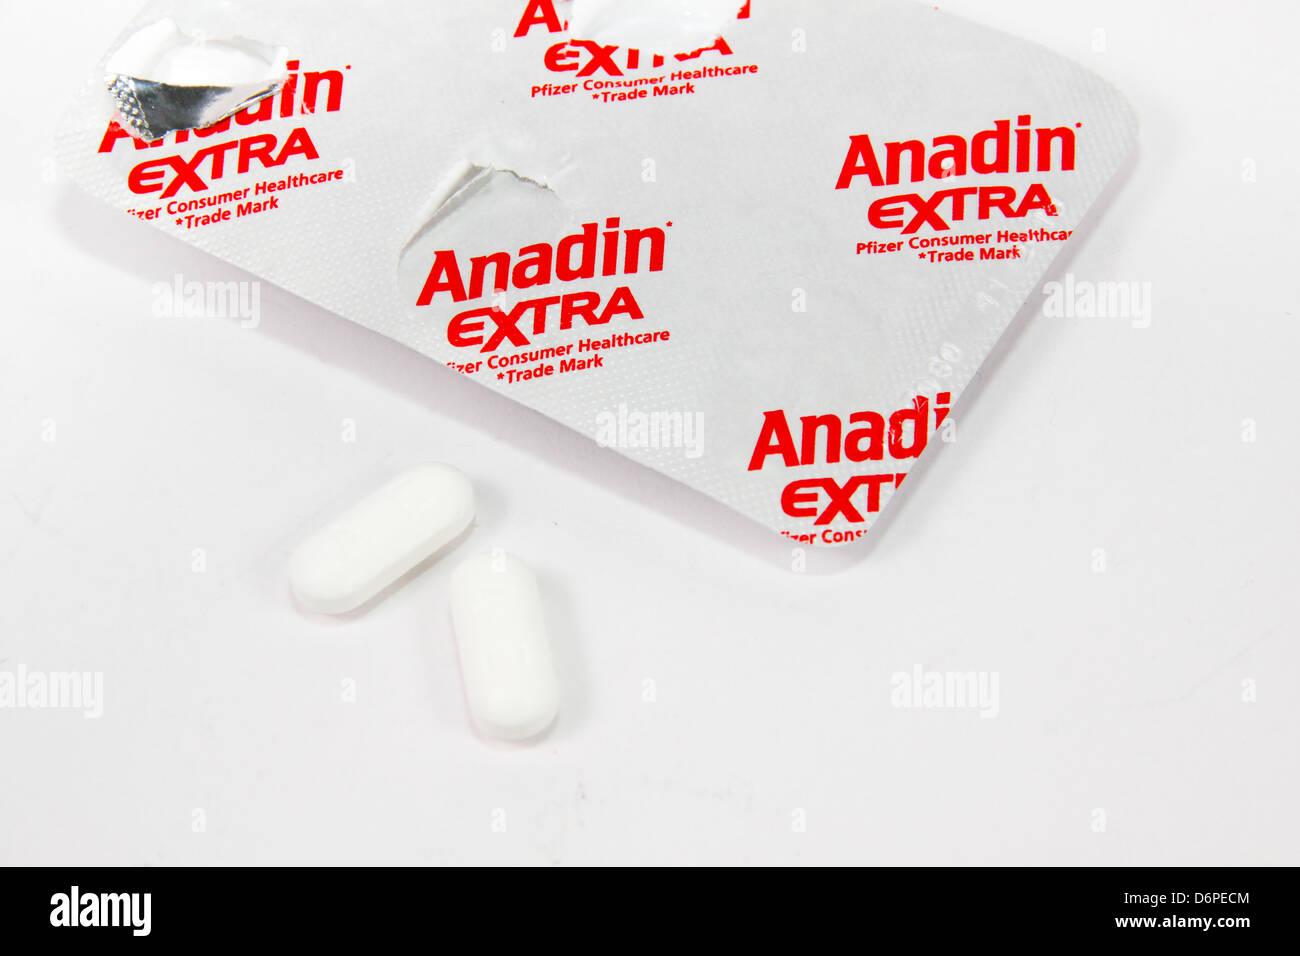 Foil blister pack of Anadin Extra paracetamol and aspirin tablets Stock Photo